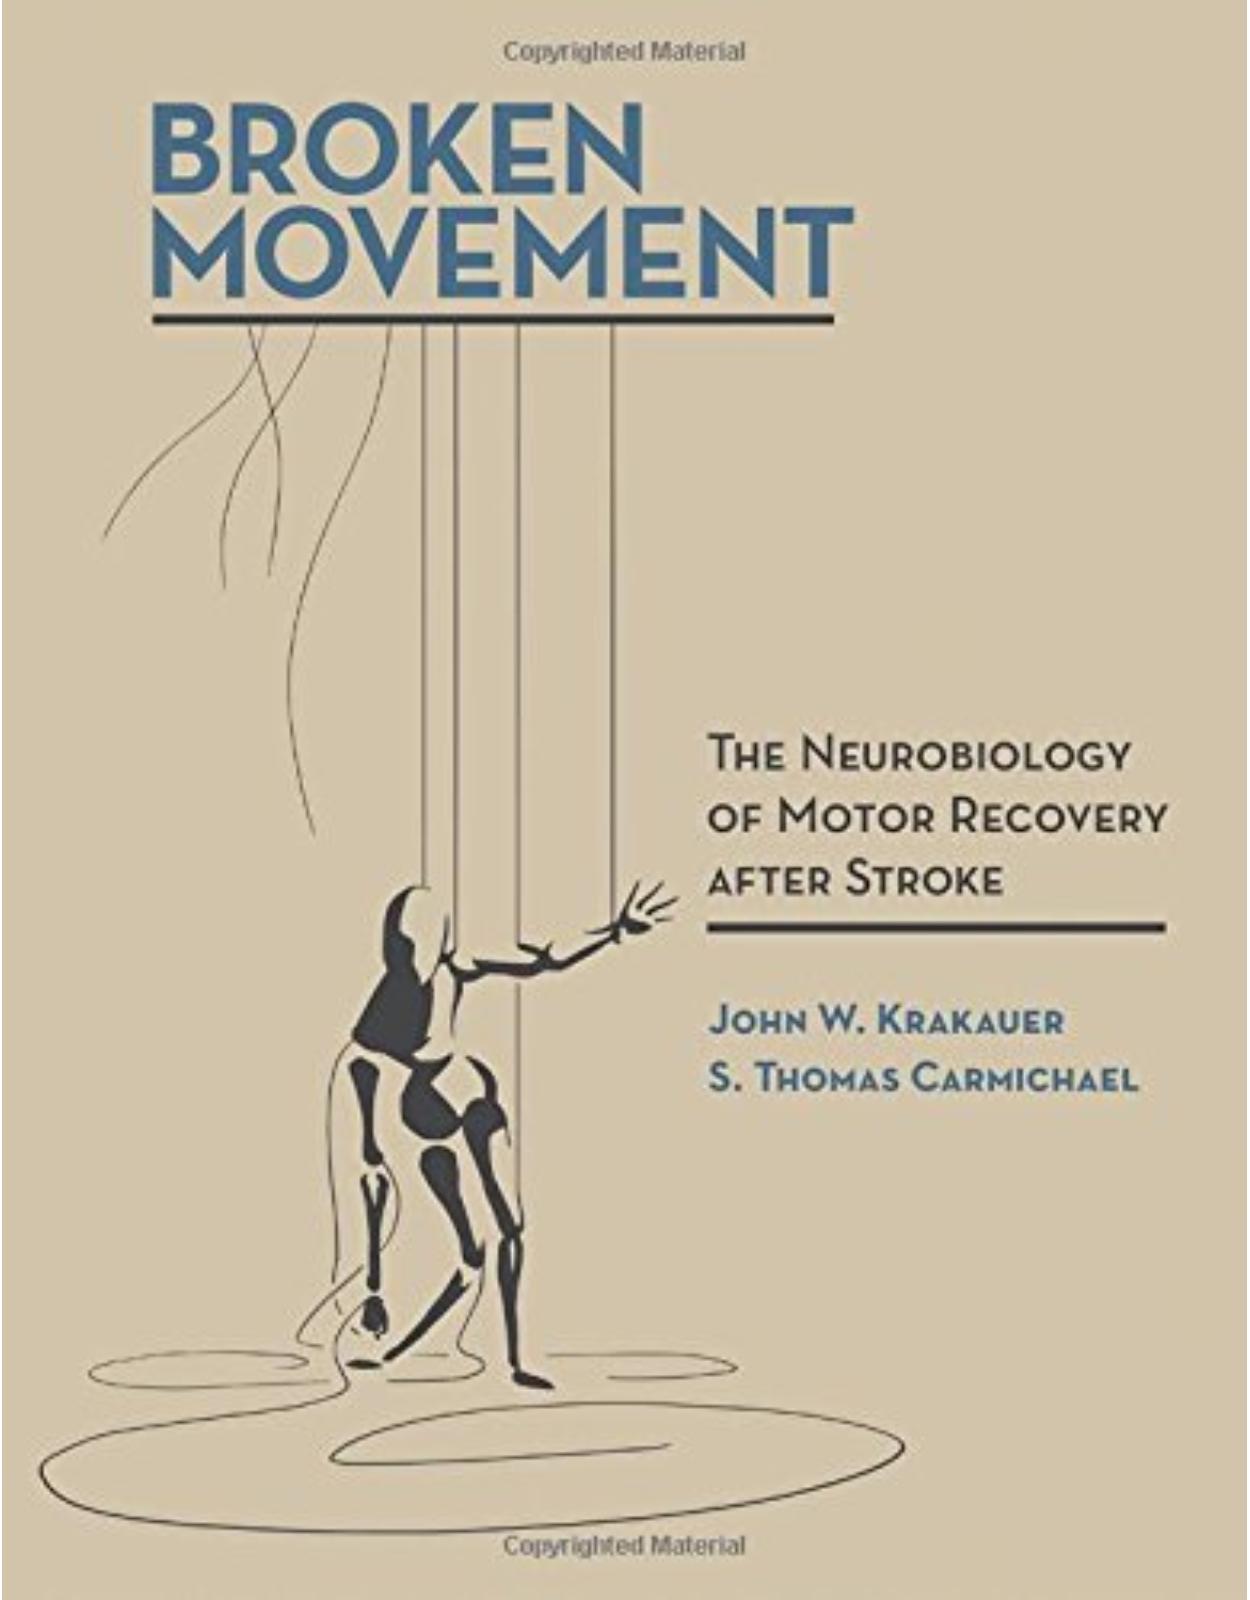 Broken Movement: The Neurobiology of Motor Recovery After Stroke